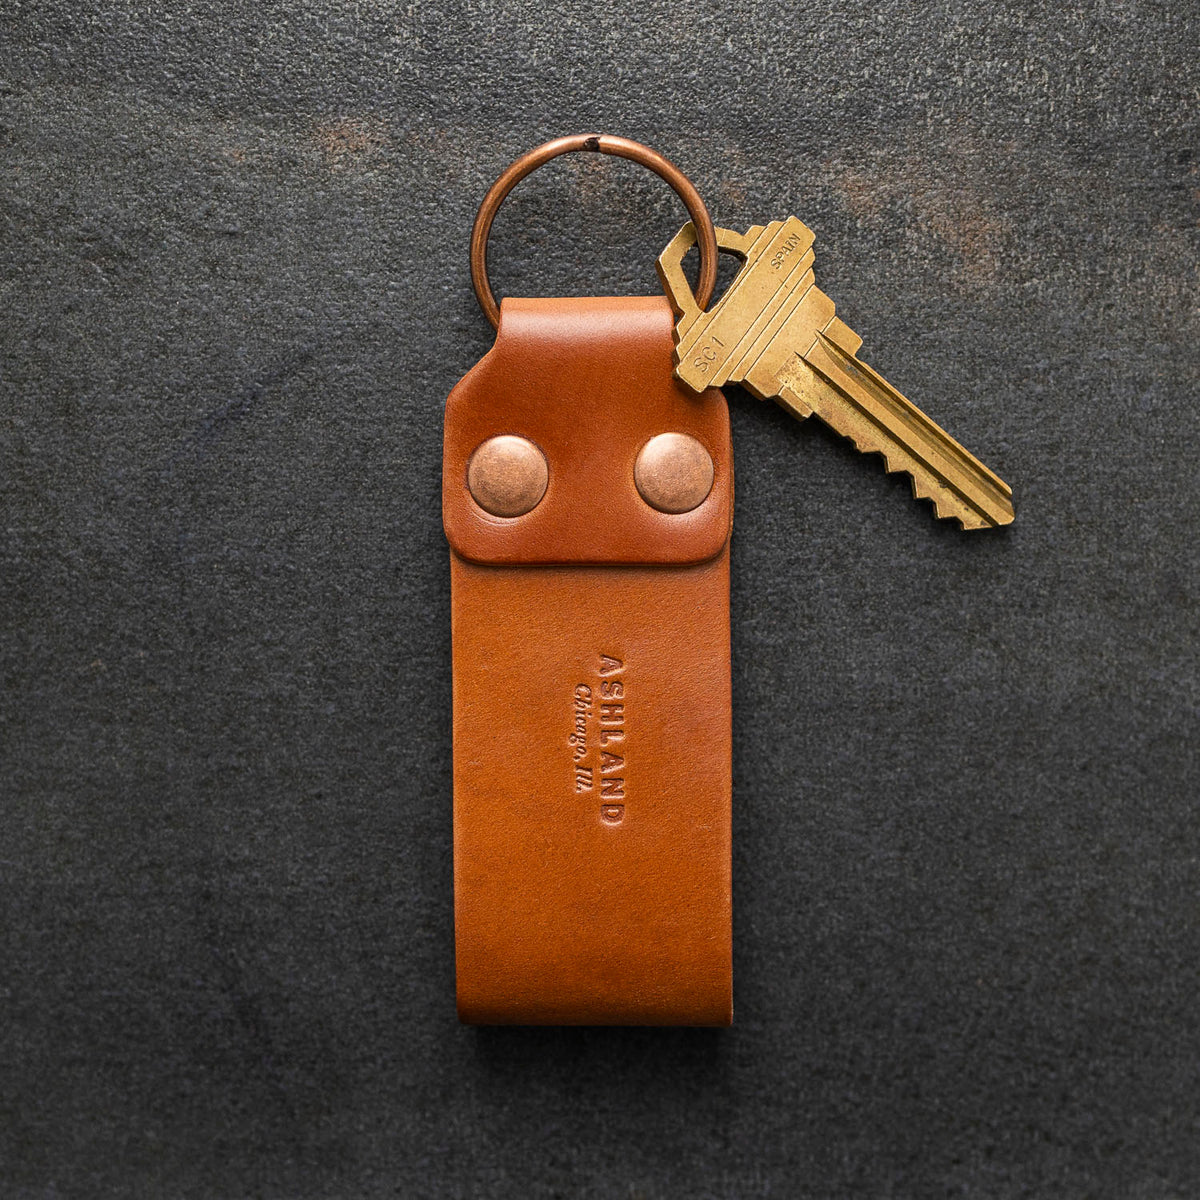 Pine Tree Leather Keychain for Keys, Camper, RV, Backpack, Mailbox